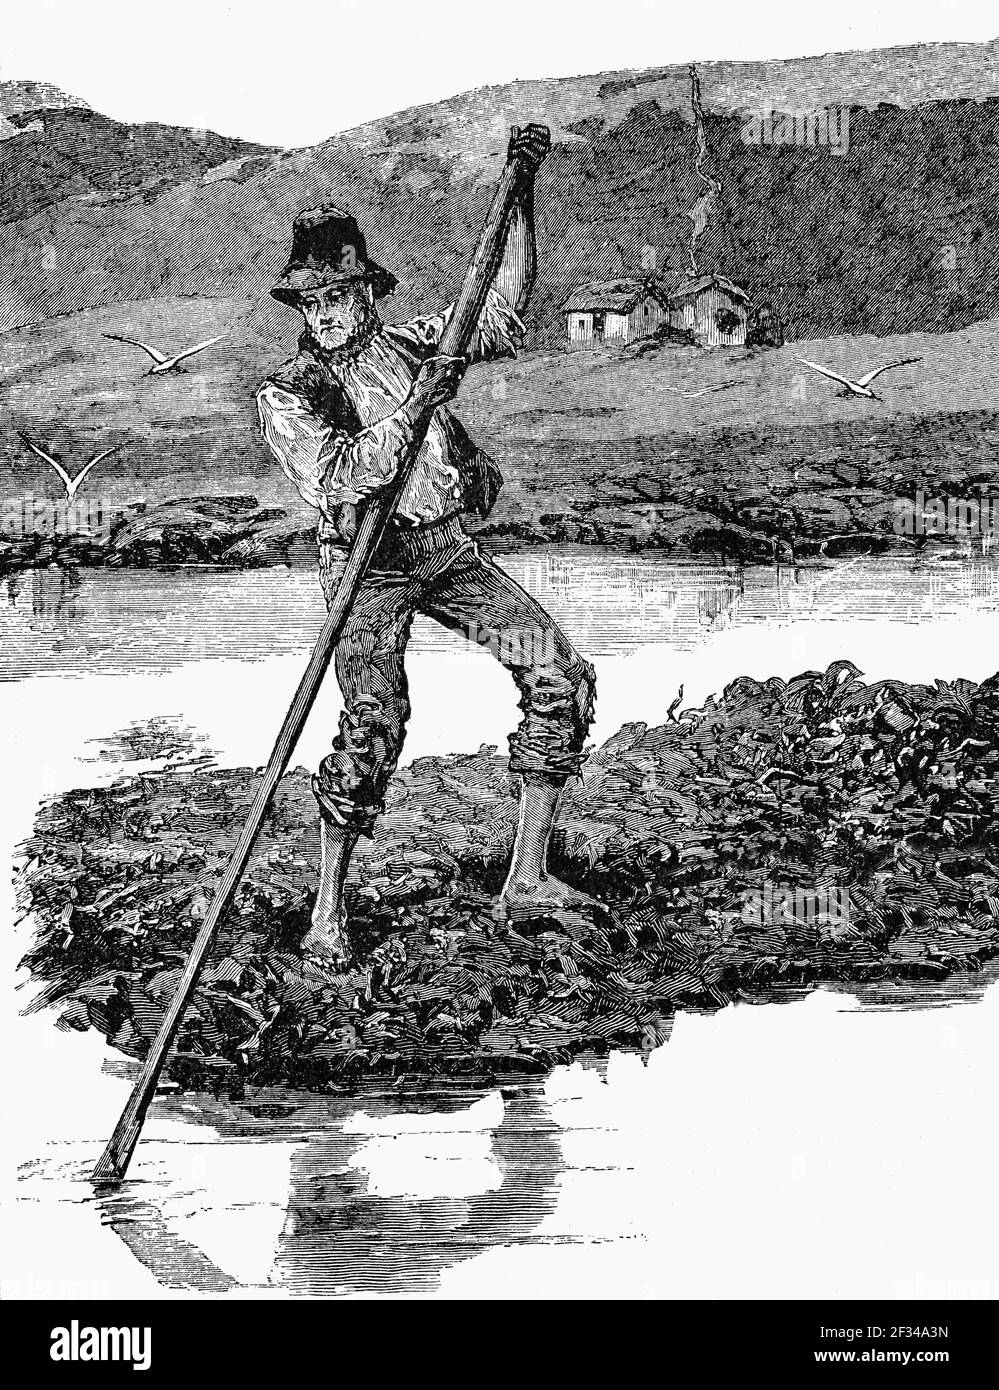 A 19th Century cartoon illustration of a farmer maneuvering a raft of tangled seaweed for use as fertiser. Off the Connemara coast, County Galway, Ireland Stock Photo